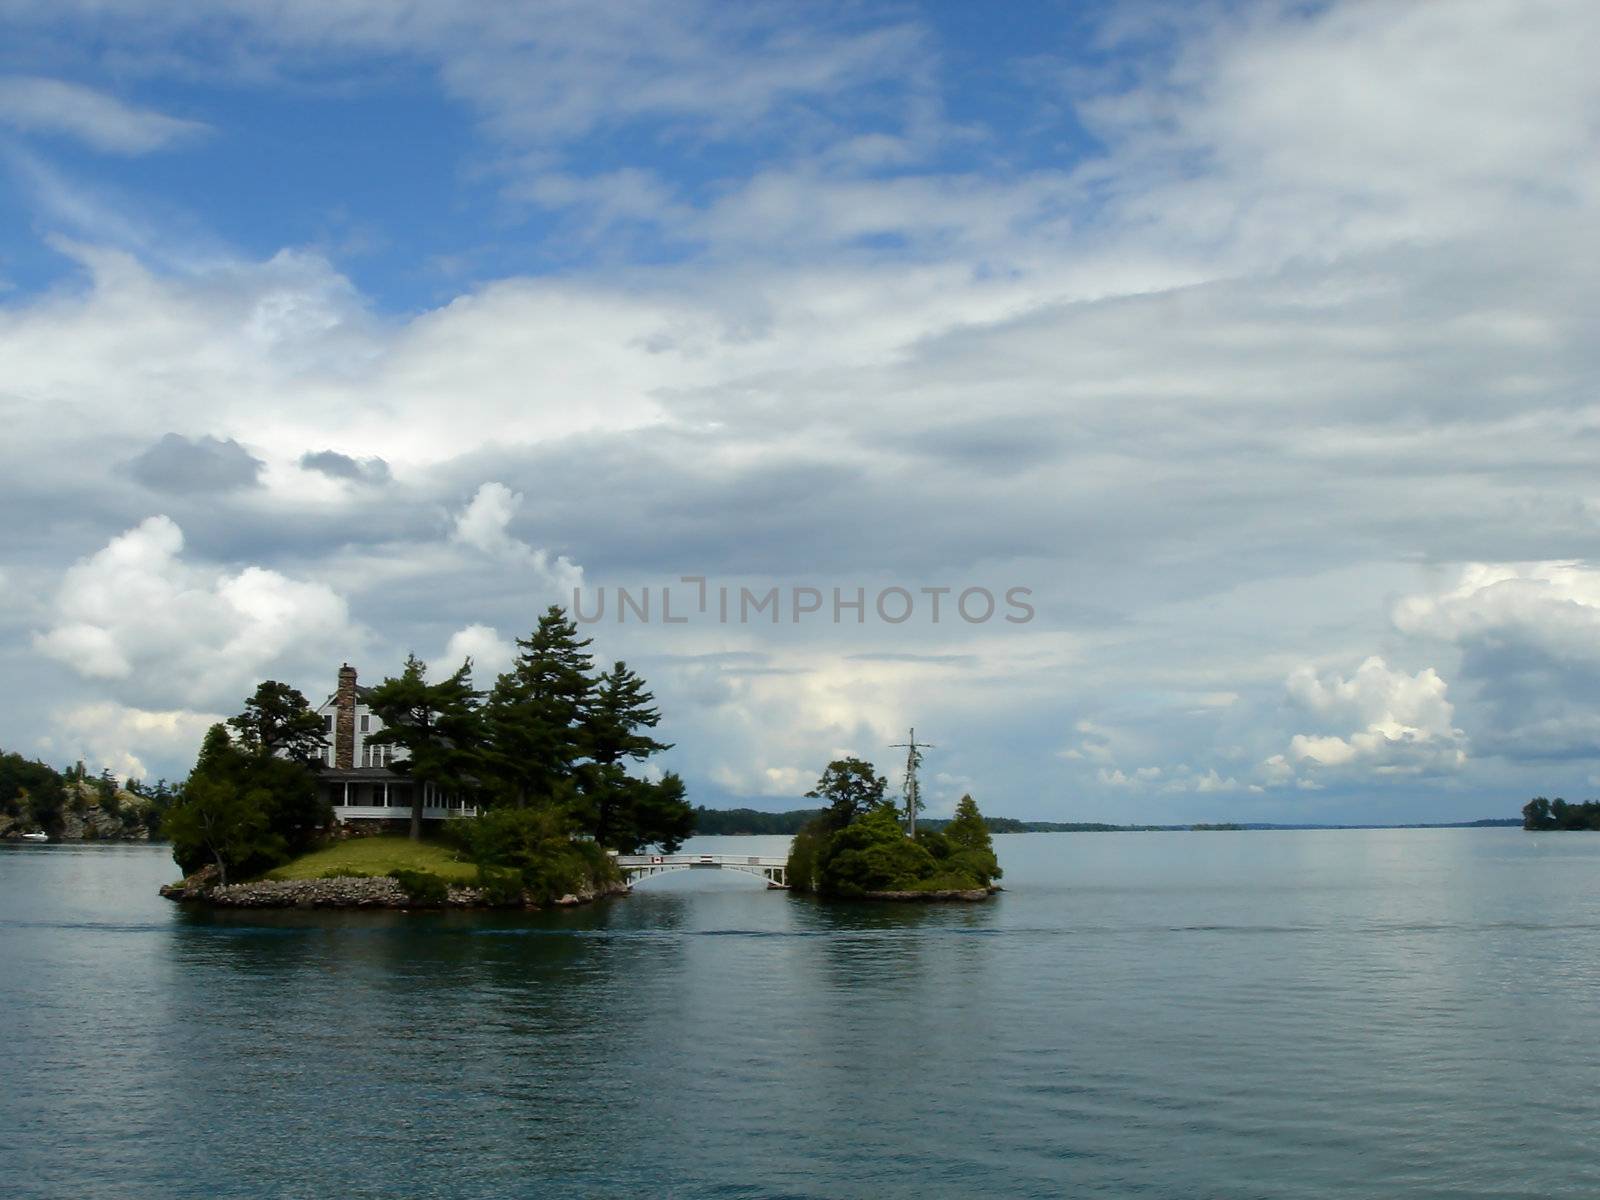 Two islands with a little bridge between and a cross on it and a house on the other between the thousand islands on the Ontario lake, Canada, by cloudy weather